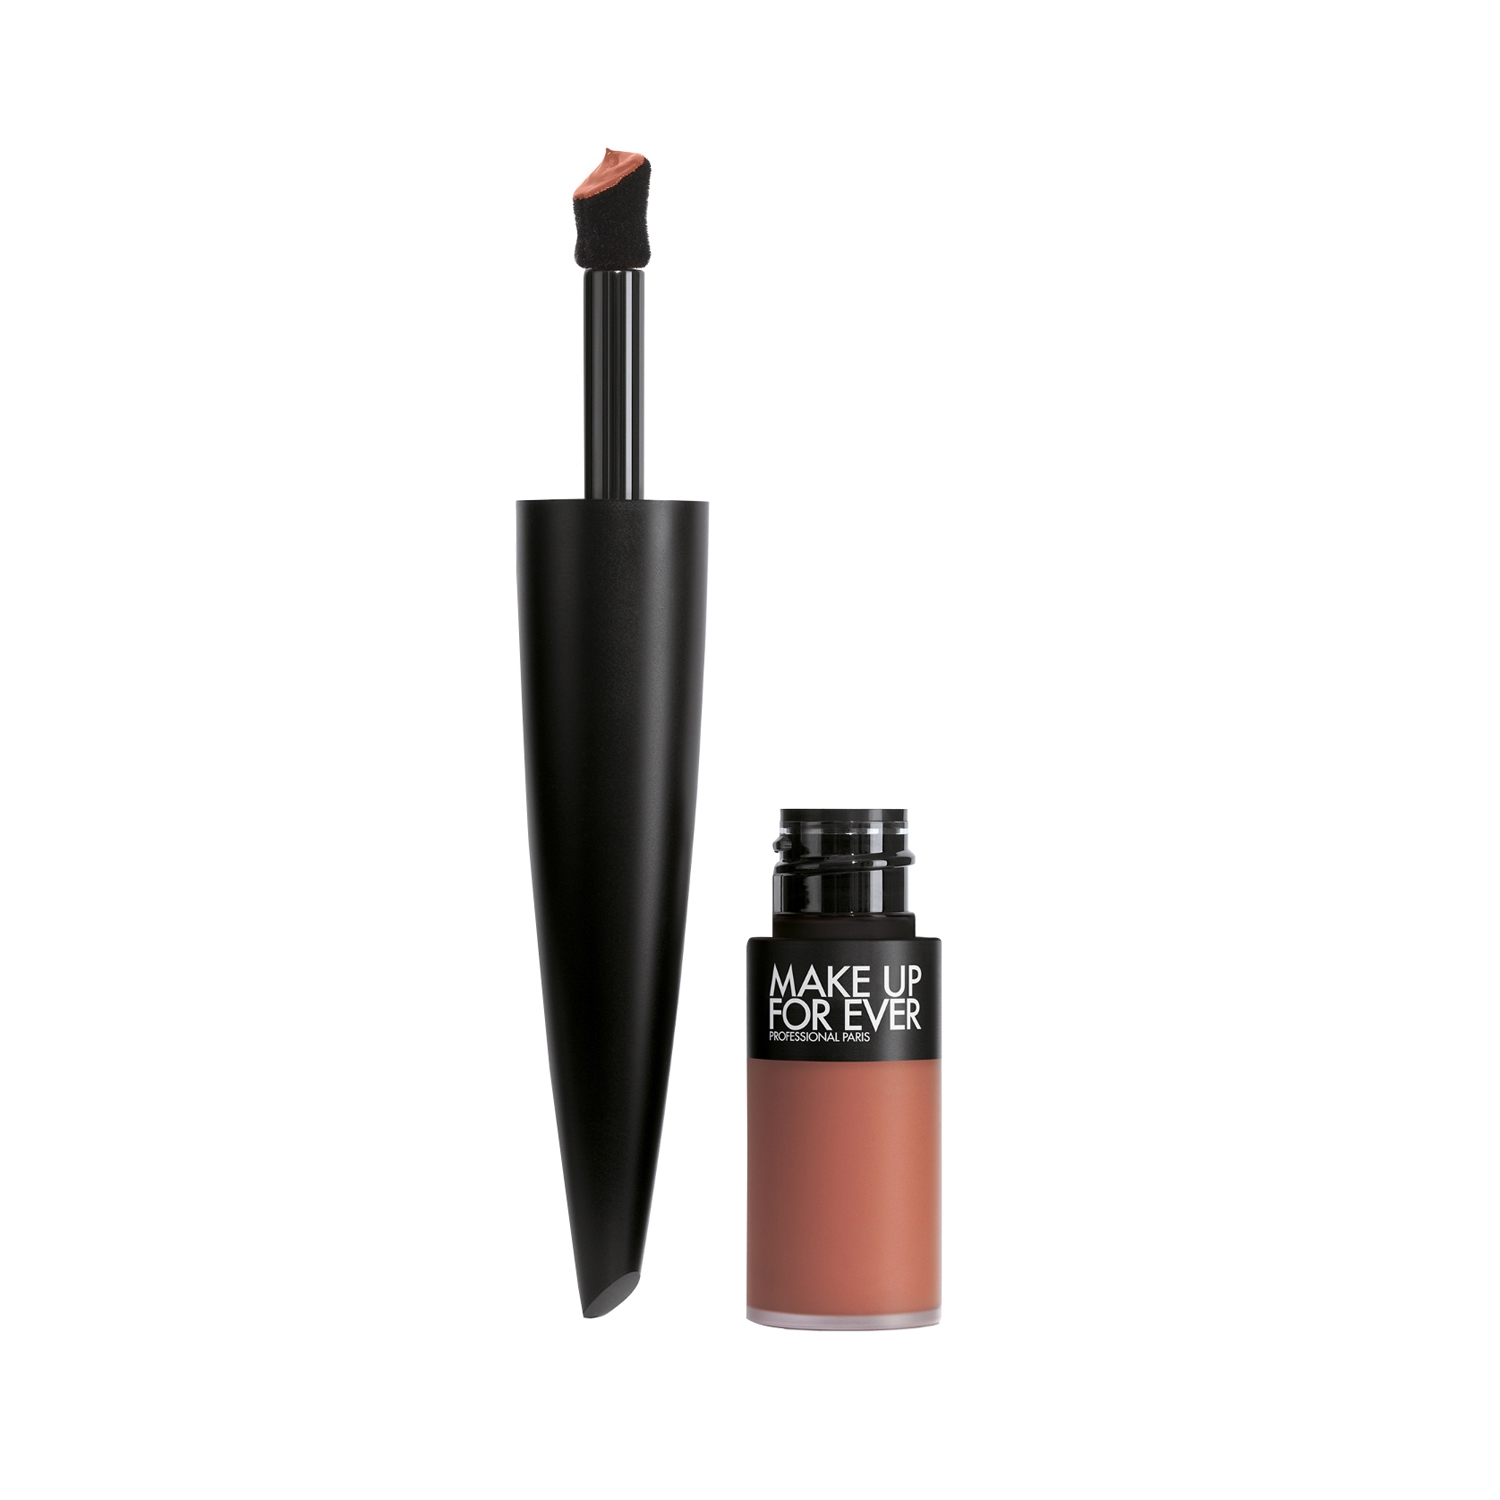 Make Up For Ever | Make Up For Ever Rouge Artist for Ever Matte Liquid Lipstick- Toffee at All Hours 192 (4.5ml)